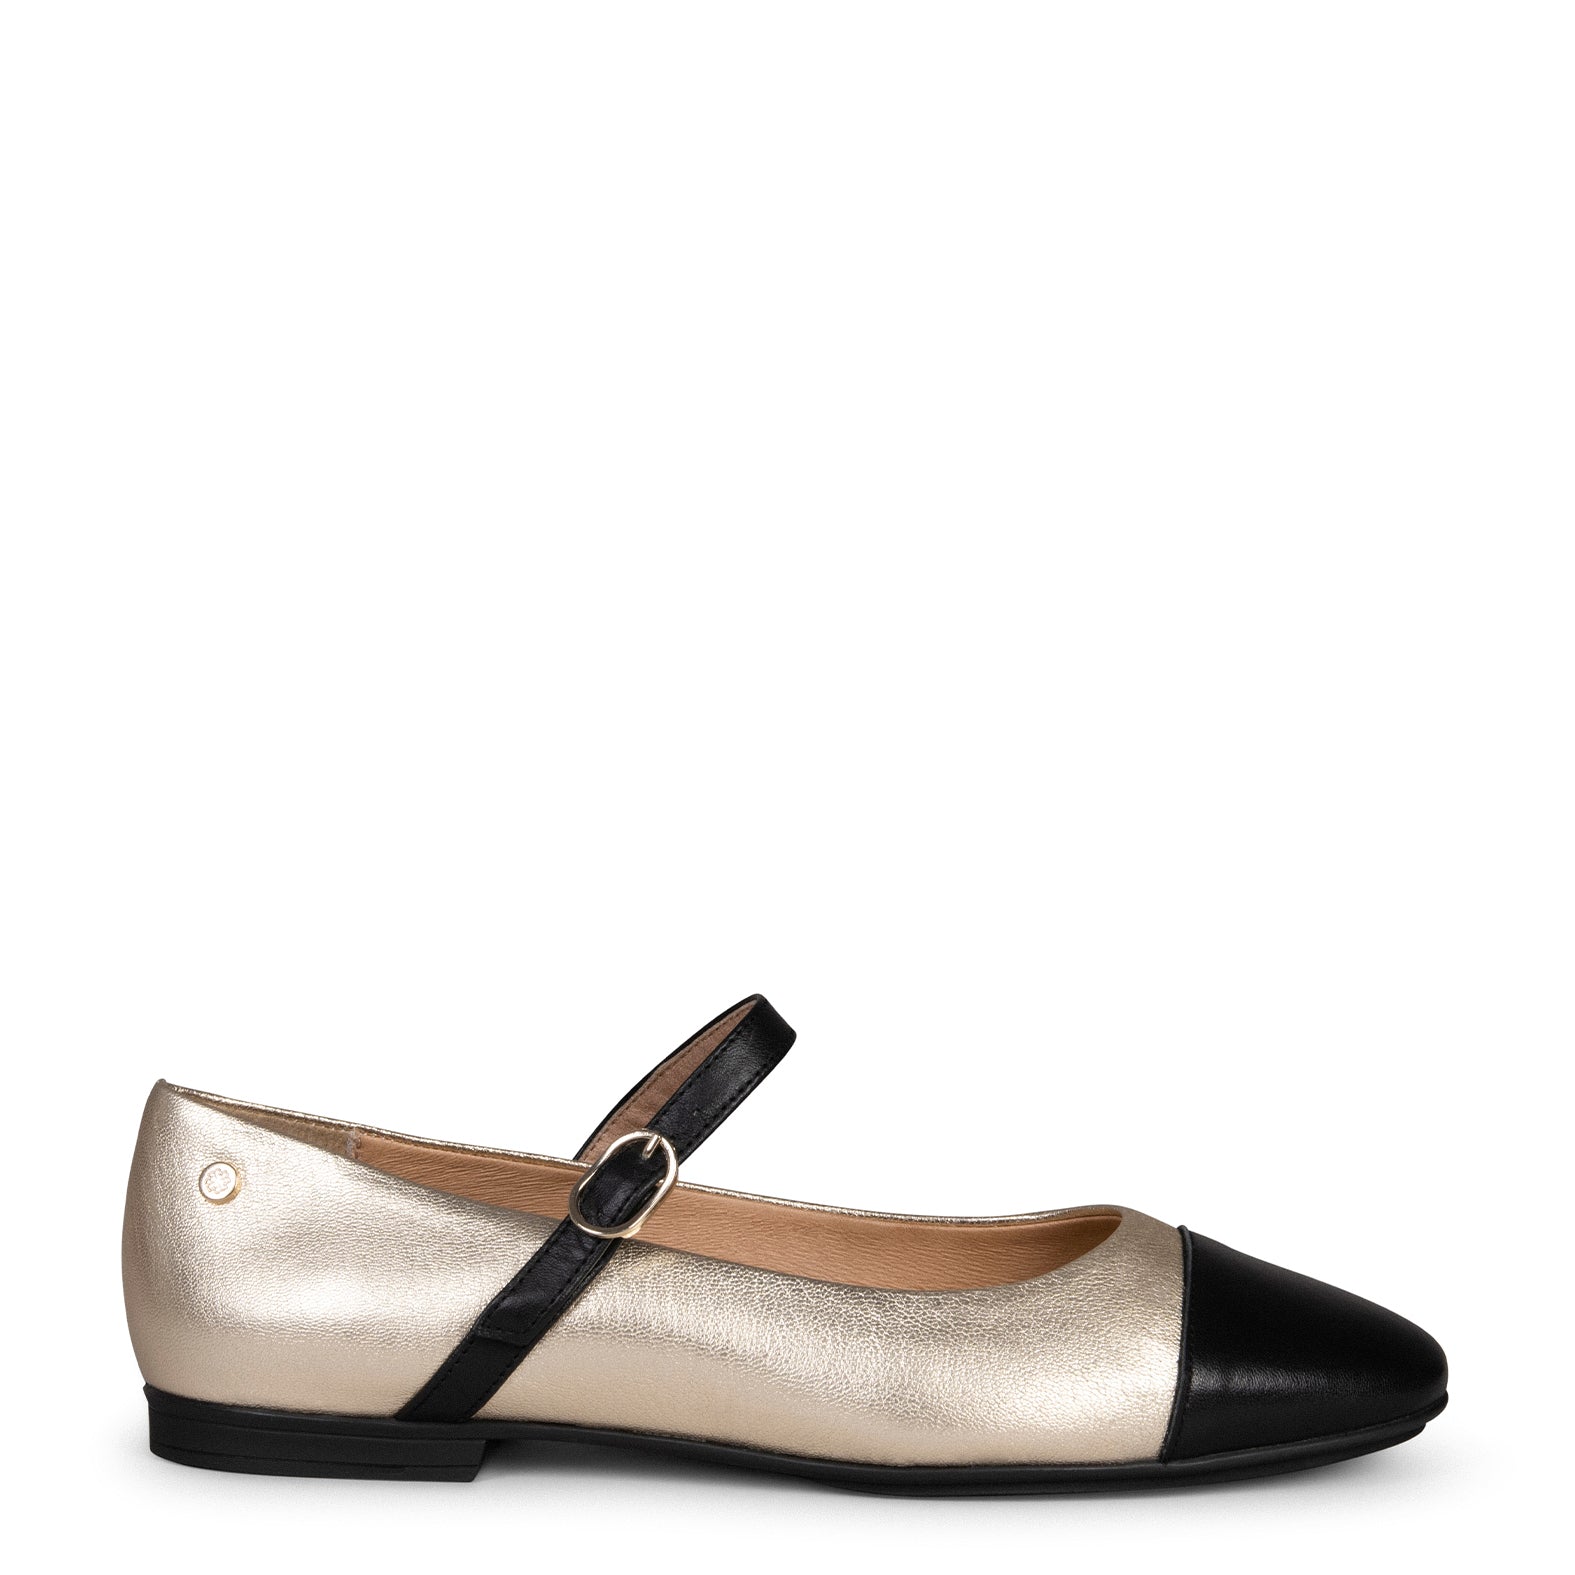 MORGANE -  GOLDEN FLAT SHOES WITH BUCKLE